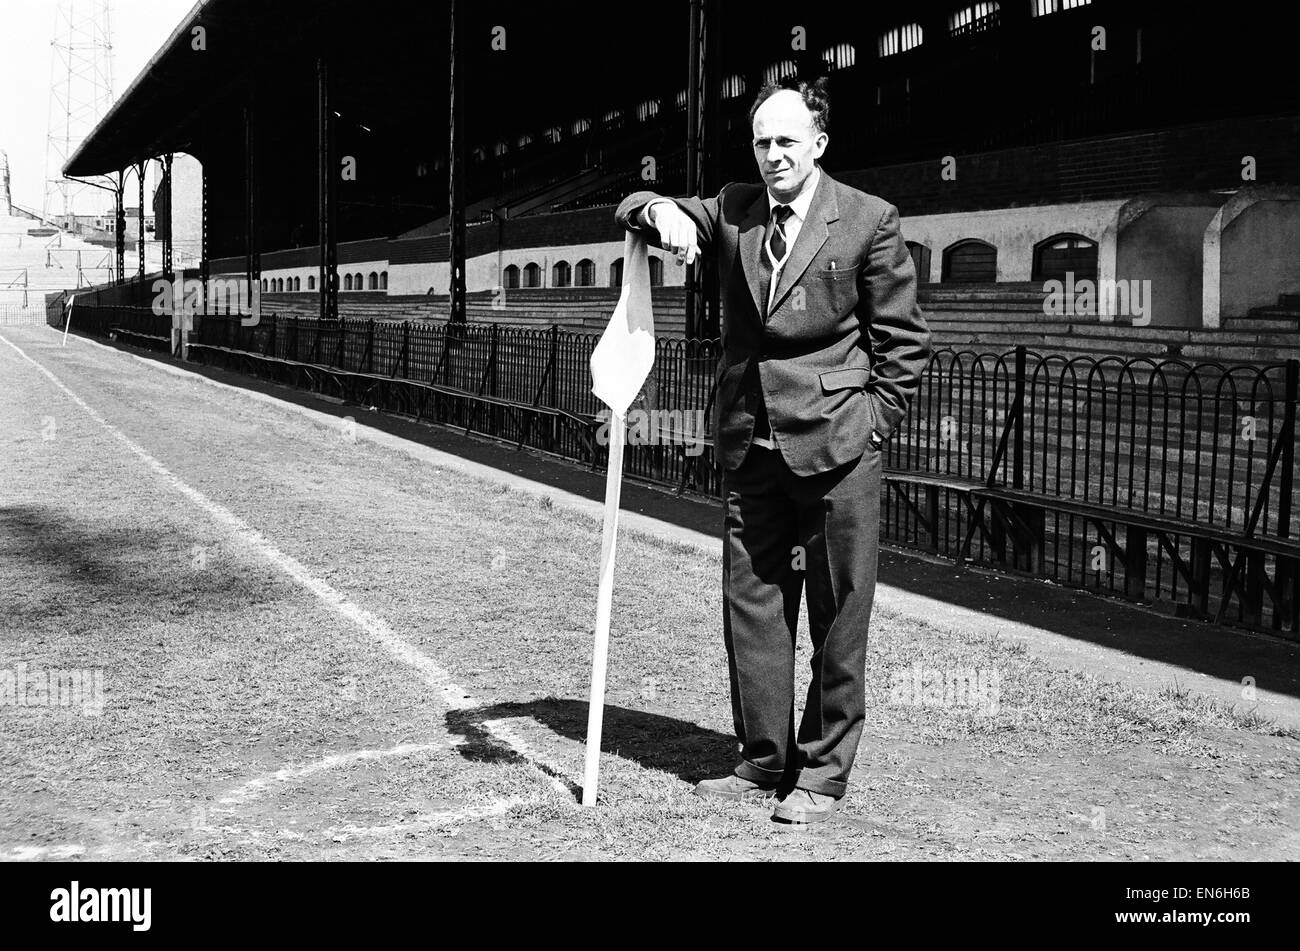 After 13 years with the club, Eddie Lowe takes a look around Craven Cottage before his last match for Fulham before he leaves to be manager at Notts County, May 4, 1963 Stock Photo